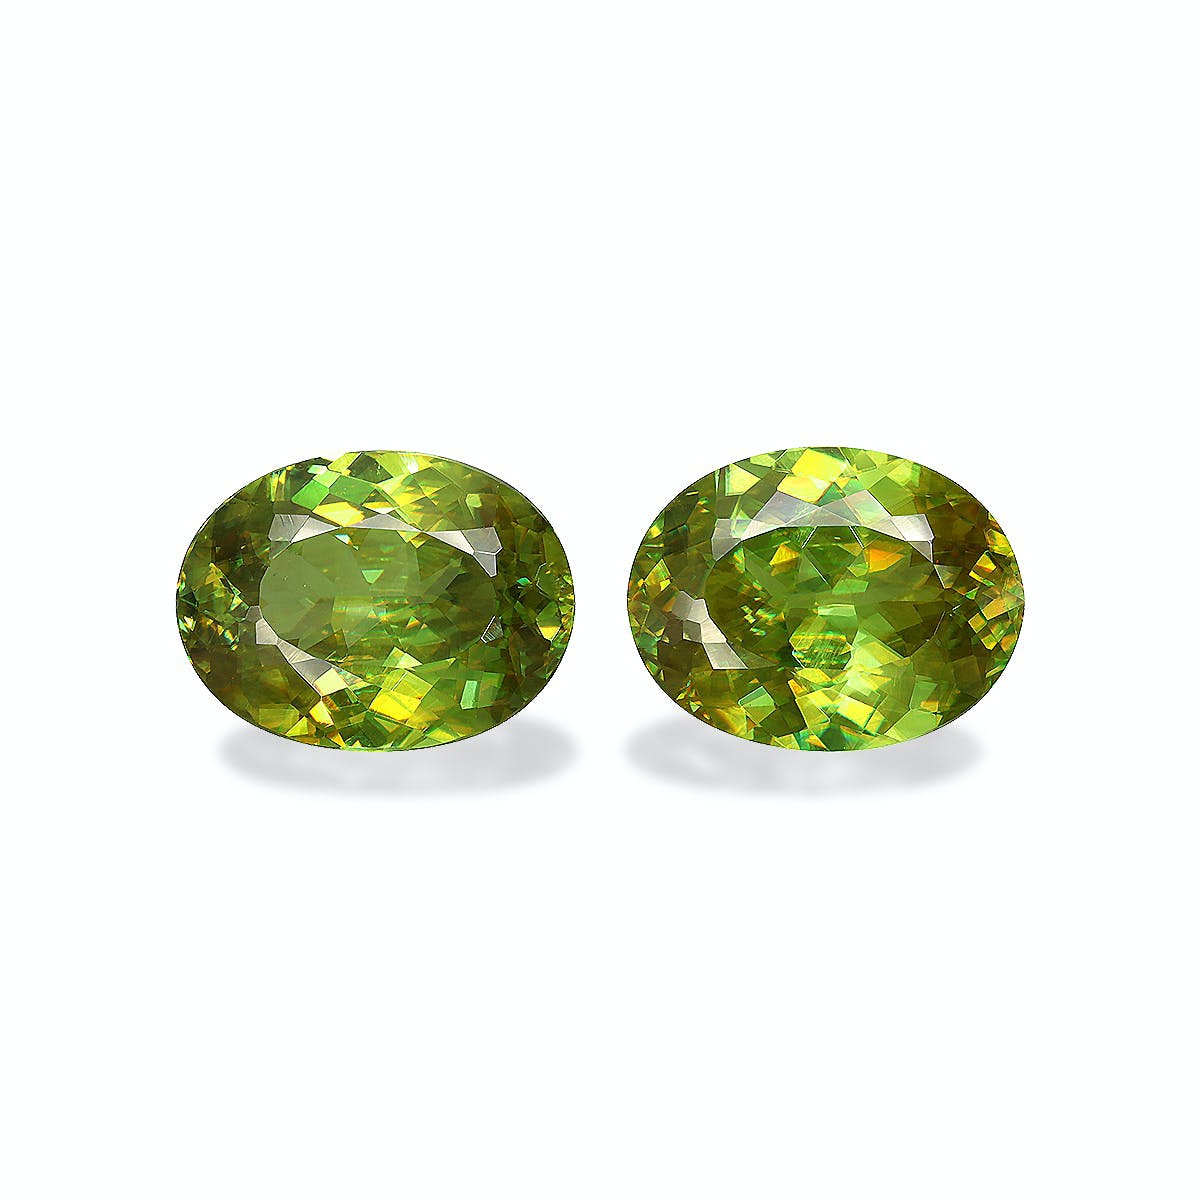 Picture of Lime Green Sphene 8.81ct - Pair (SH1089)